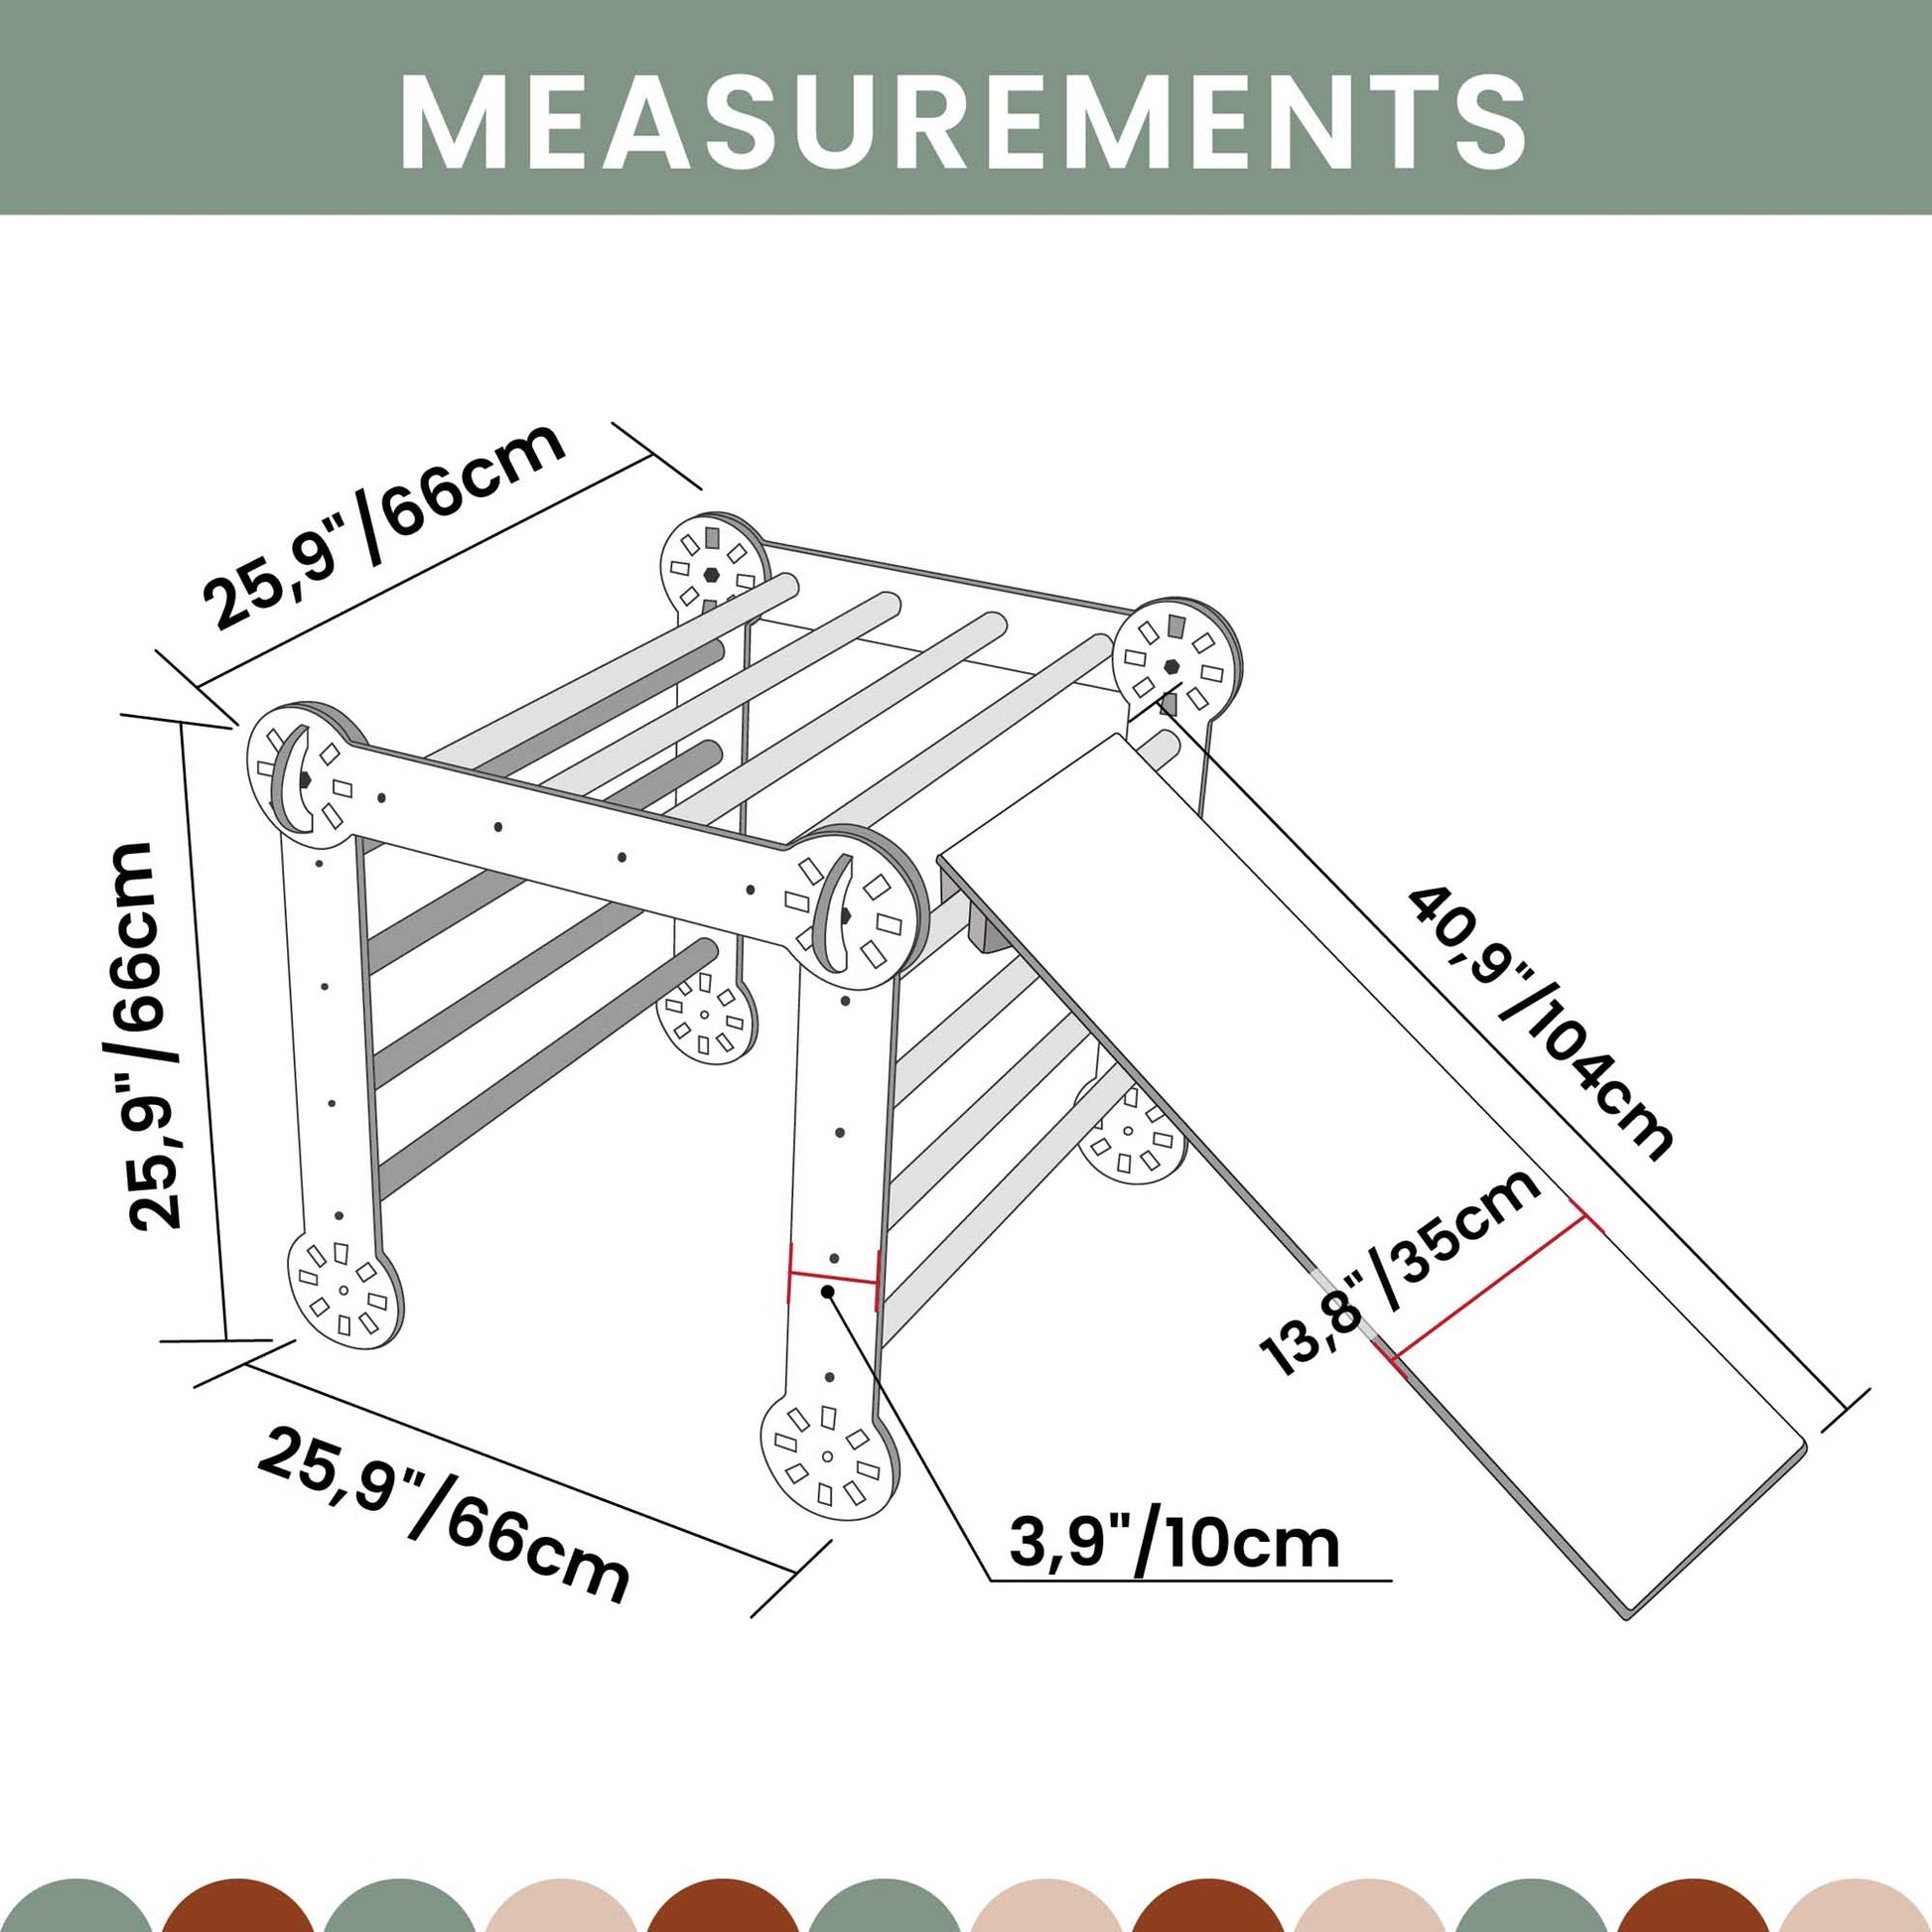 A diagram showing the measurements of an Climbing triangle + Transformable climbing gym + a ramp with sensory panels.